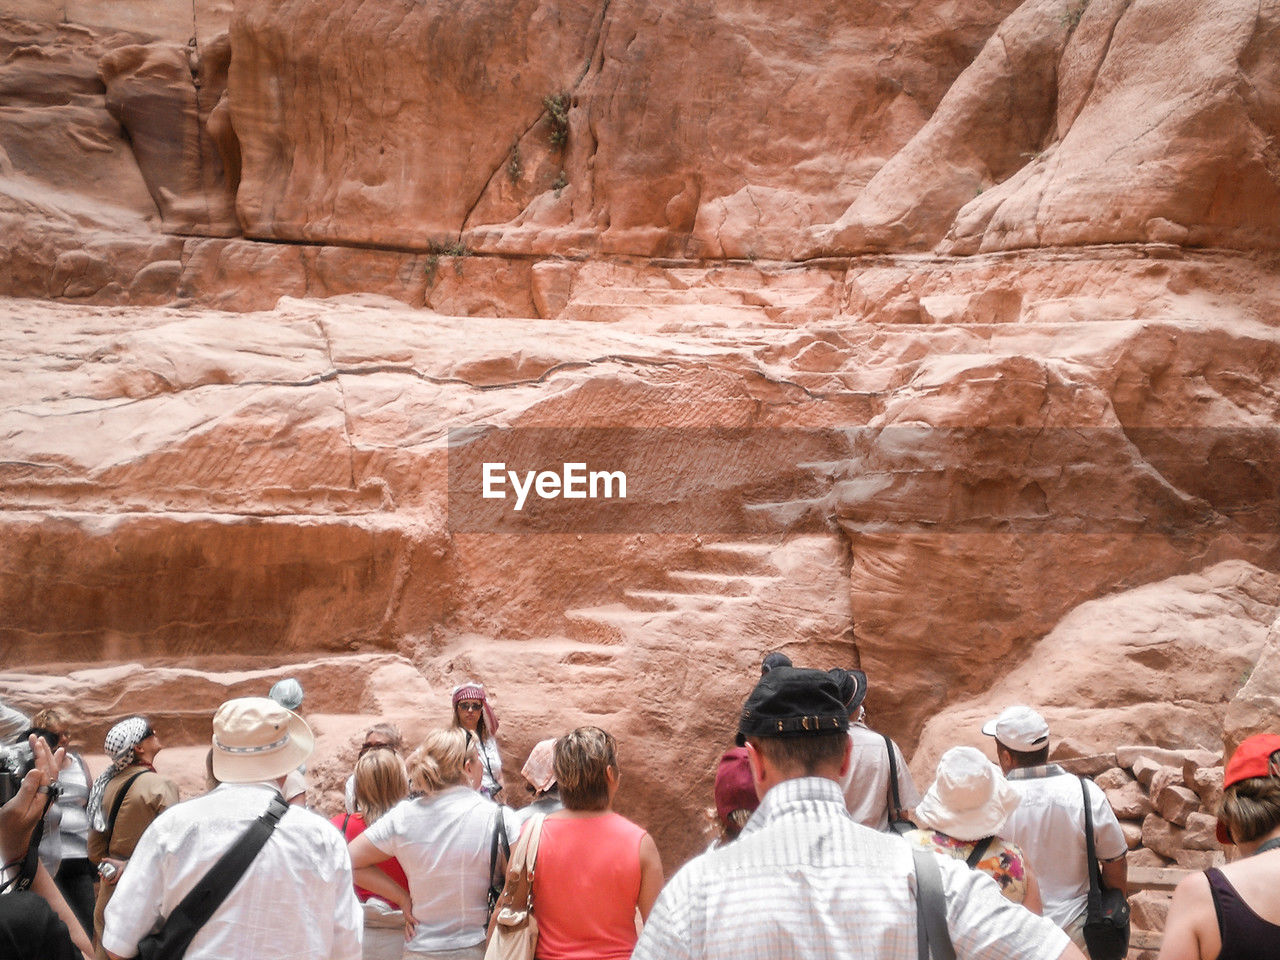 group of people, rock, wadi, rock formation, large group of people, travel destinations, travel, men, nature, canyon, crowd, geology, physical geography, adult, women, tourism, formation, day, lifestyles, outdoors, desert, leisure activity, religion, rear view, mountain, land, ancient history